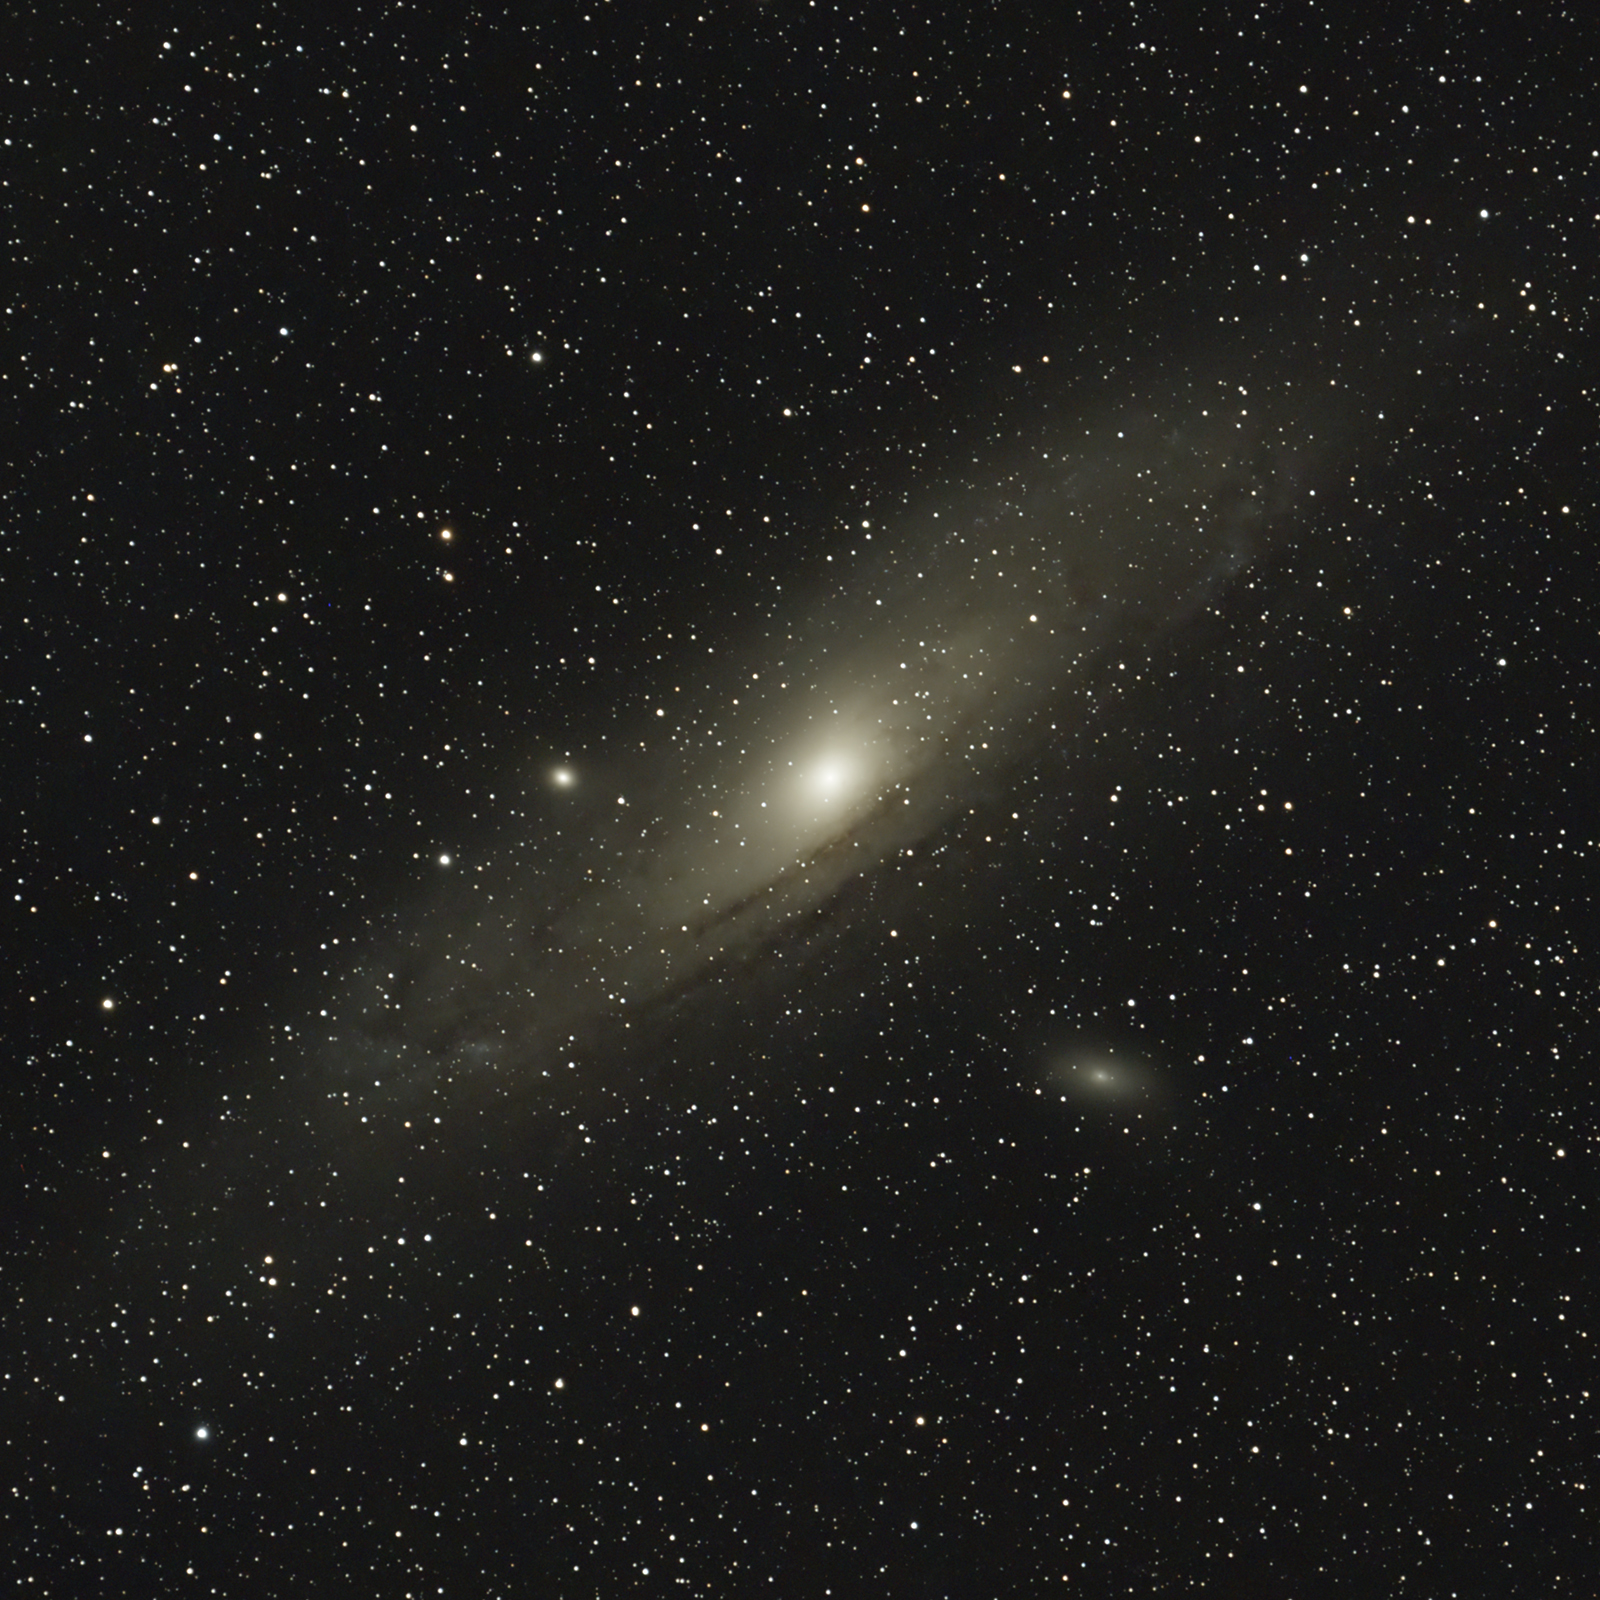 M31crop acl200 2600 g200 br10 nofilter 25F 1500S APP PS23 11232022m